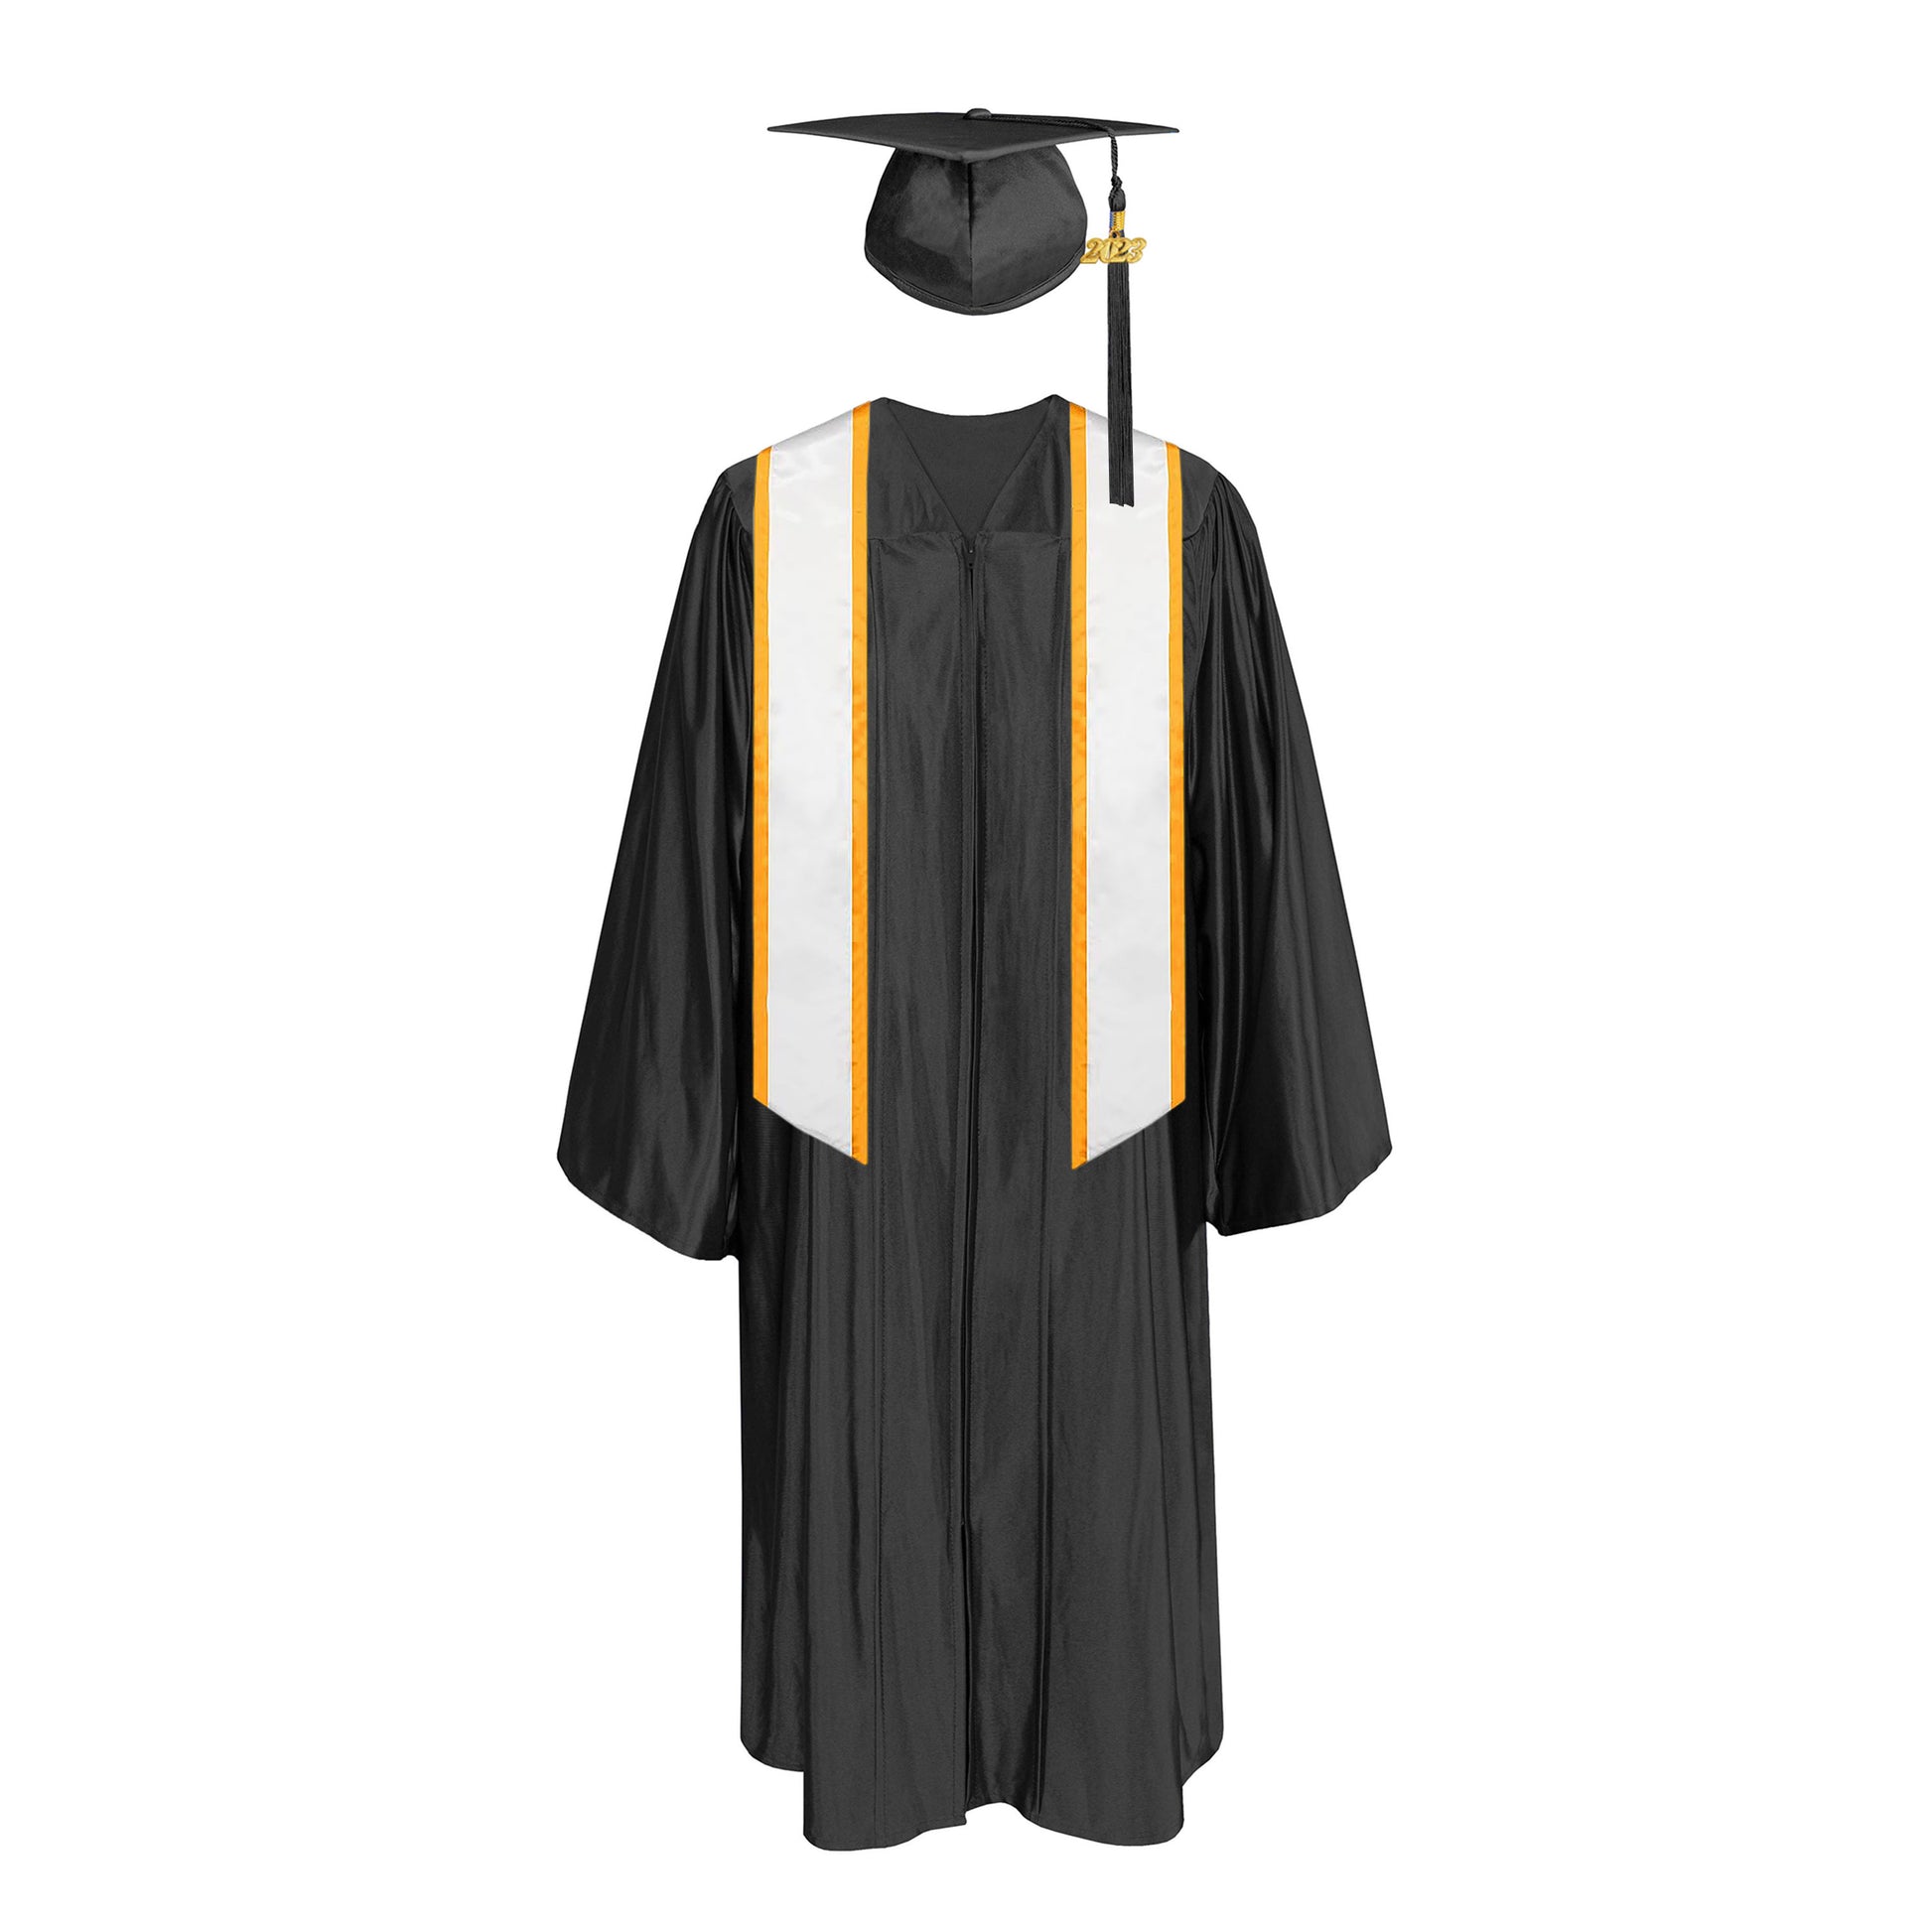 Shiny Cap With Tassel, Gown, Honor Stole Angled End with Trim 72”|graduate graduation gown-CA graduation